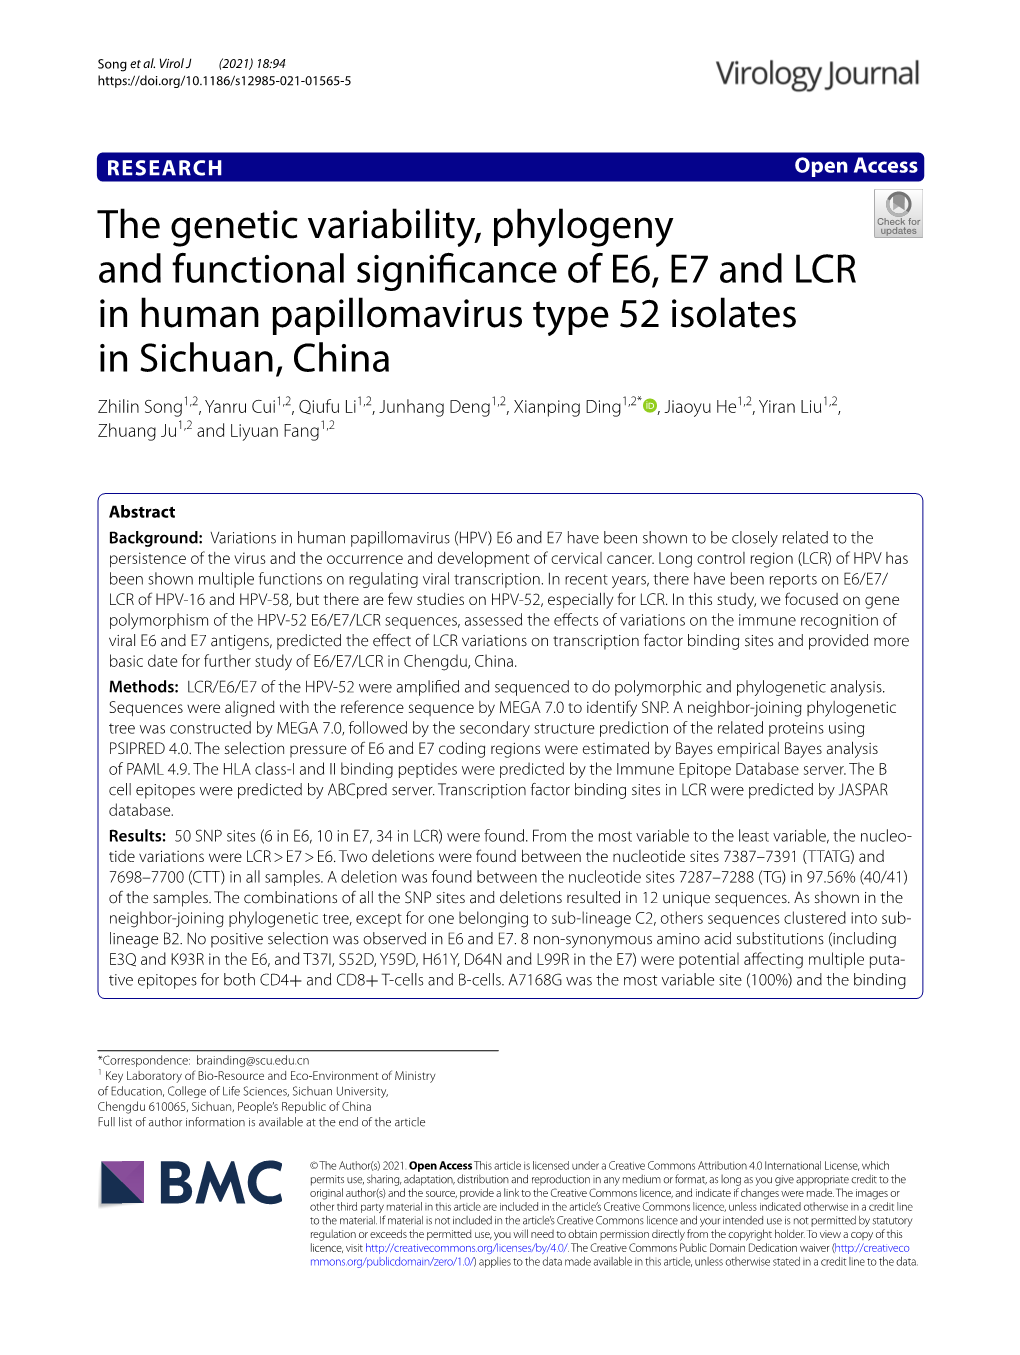 The Genetic Variability, Phylogeny and Functional Significance of E6, E7 and LCR in Human Papillomavirus Type 52 Isolates In